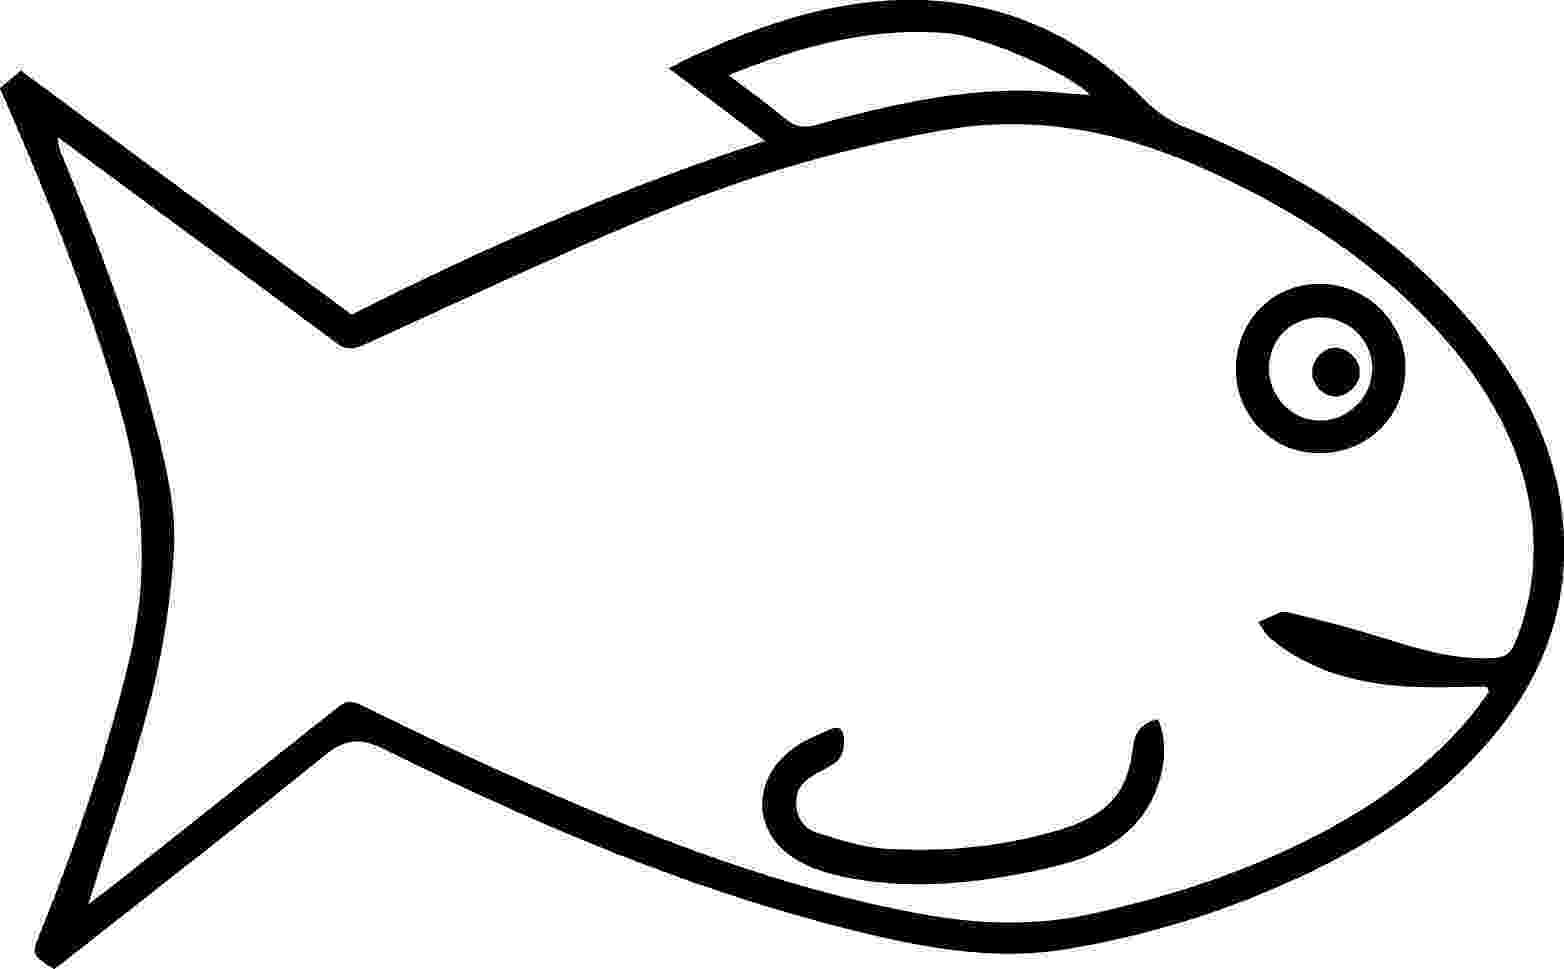 picture of fish to color free fish coloring pages for kids picture fish of to color 